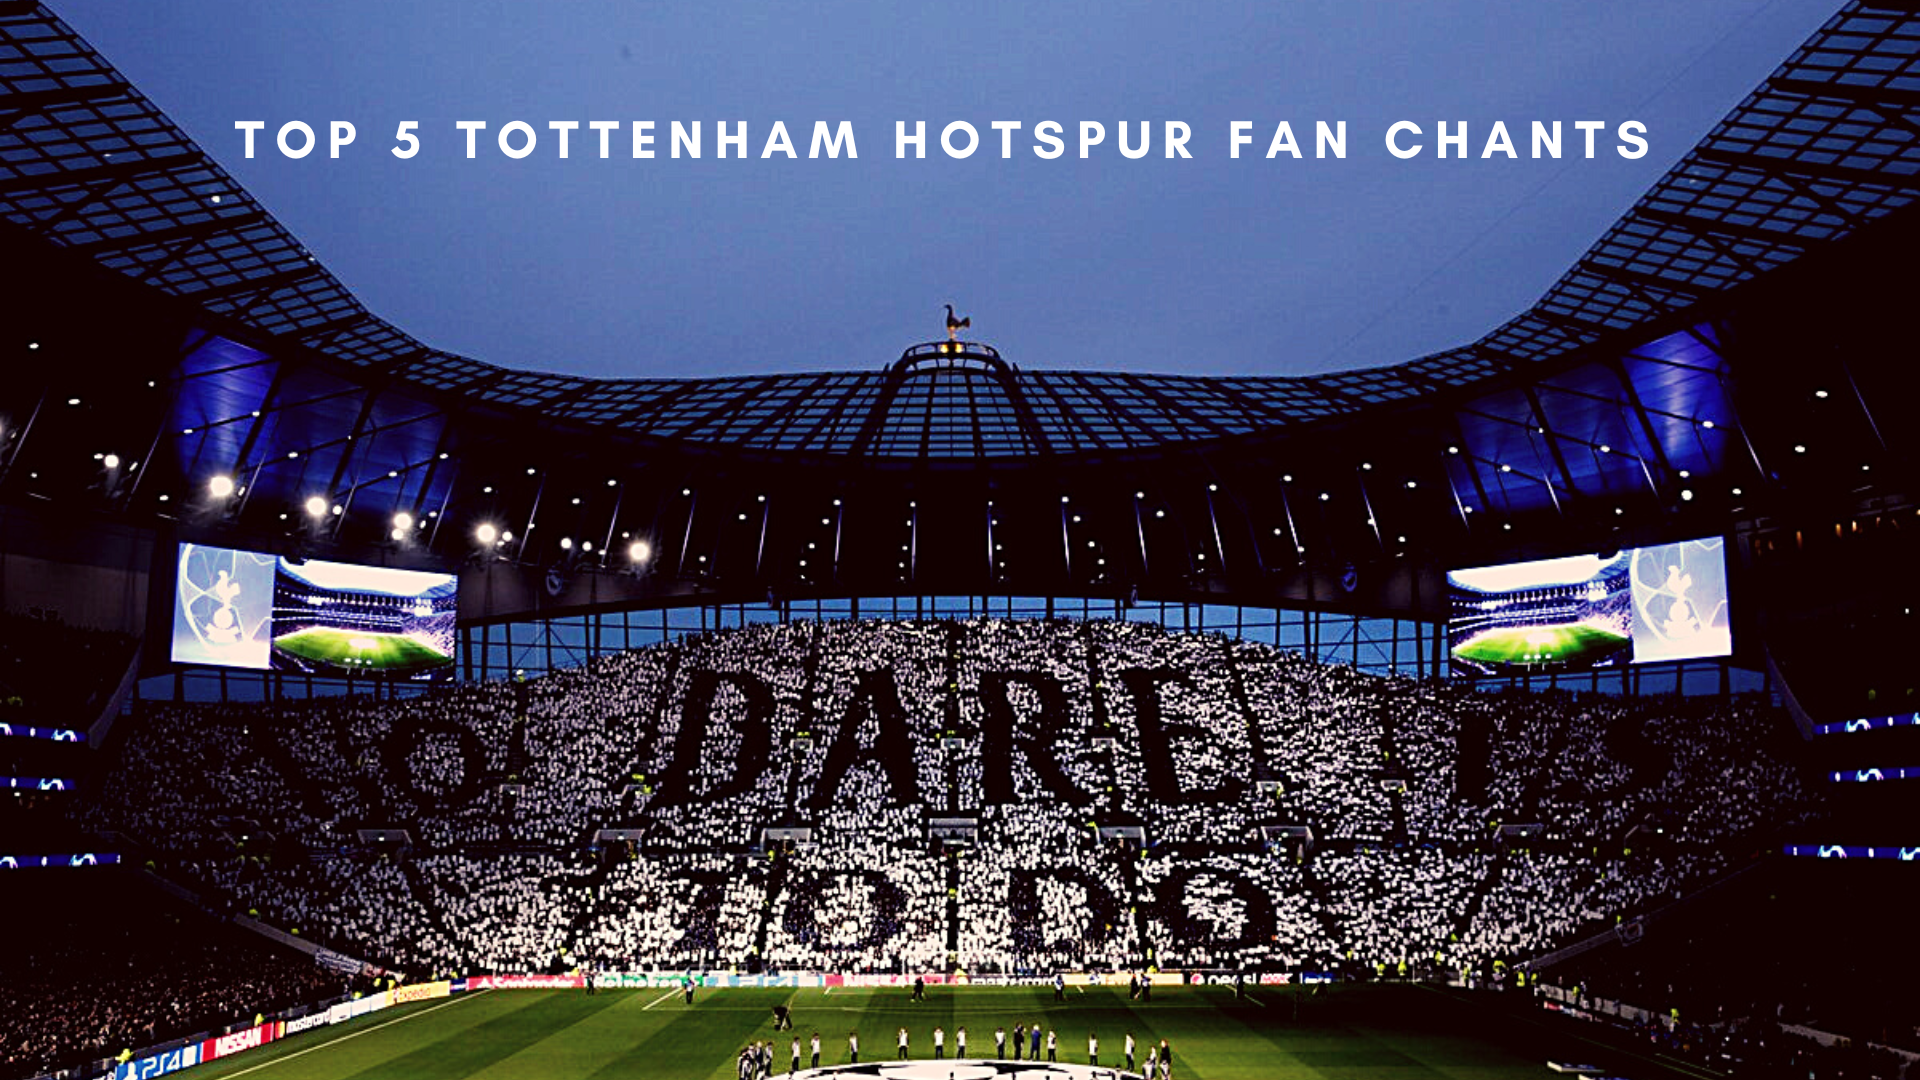 Here is a list of top 5 Tottenahm Hotspur chants. (Picture was taken from tothelaneandback.com)